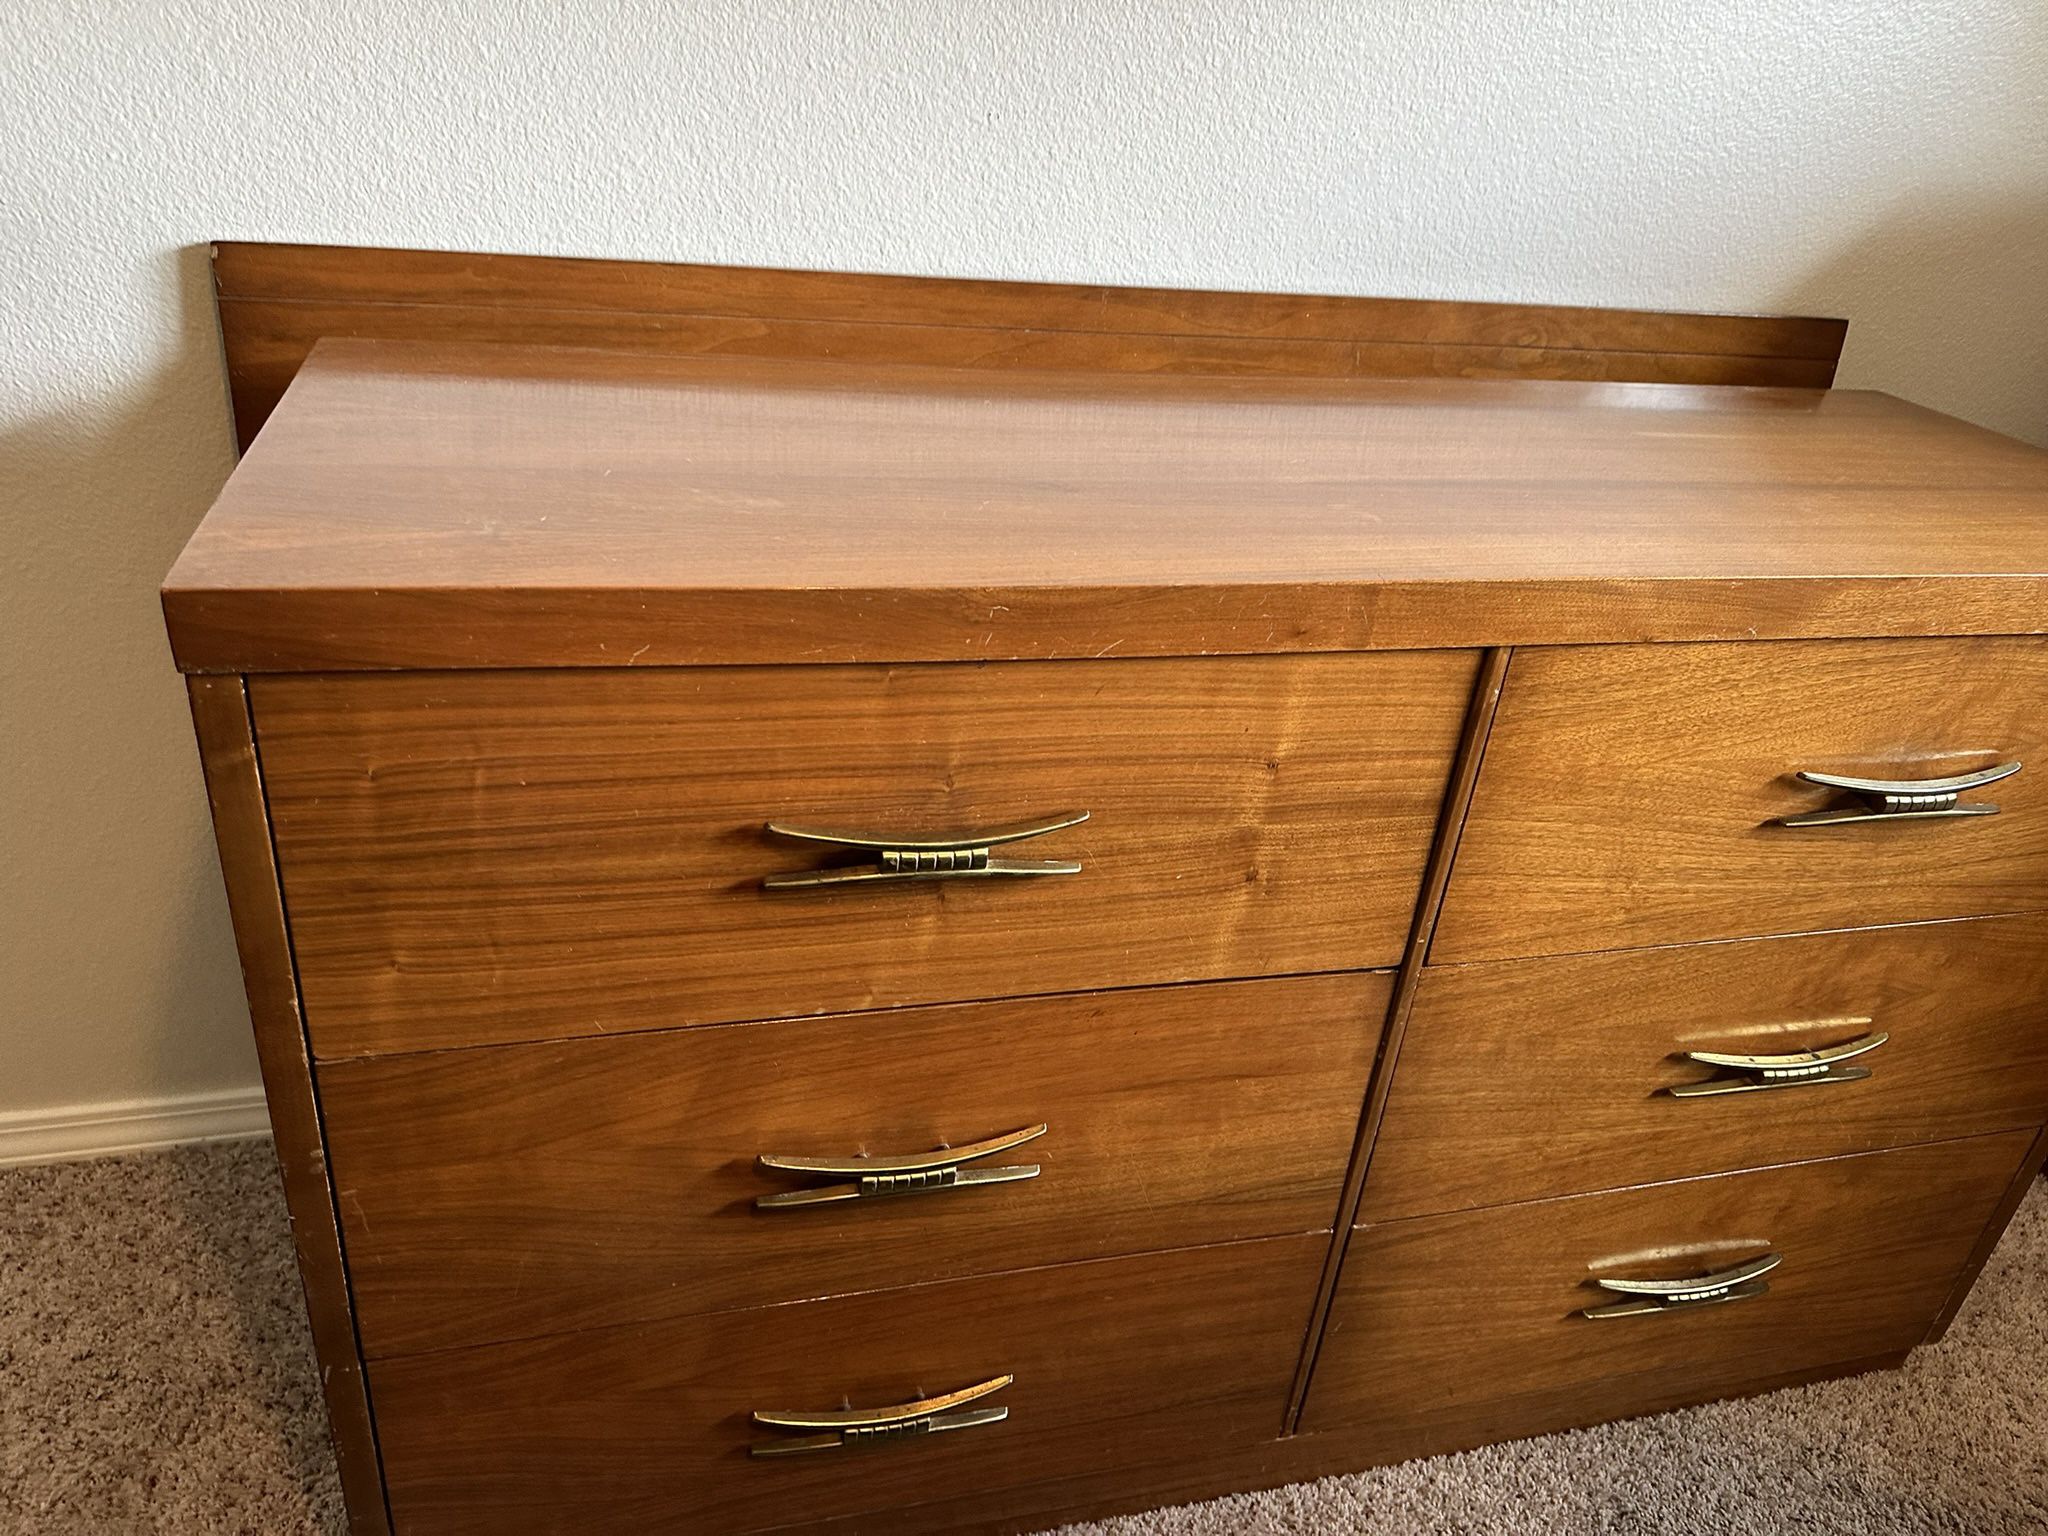 Mid Century Modern Antique Bedroom Furniture- Dresser Without Mirror, Chest Of Drawers and Headboard